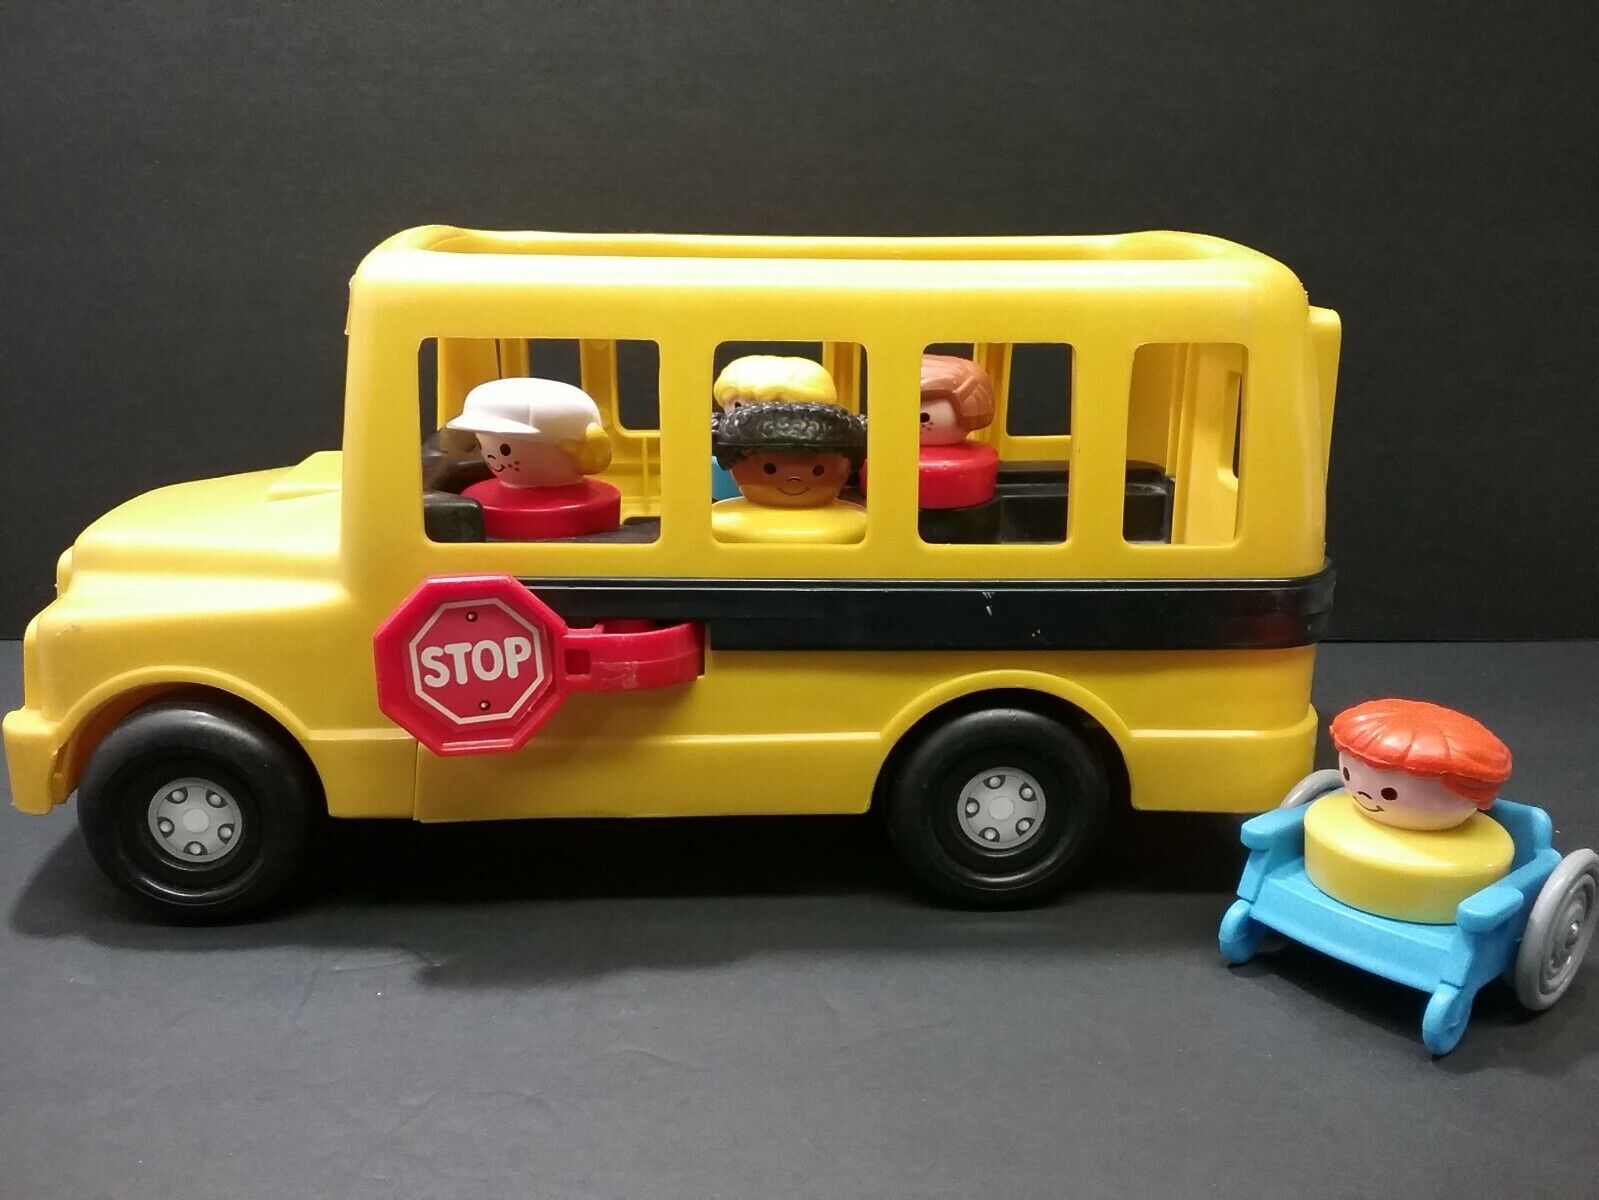 Vintage 1995 Max 52% OFF Fisher-Price National products Hanicap School people bus little 5 w